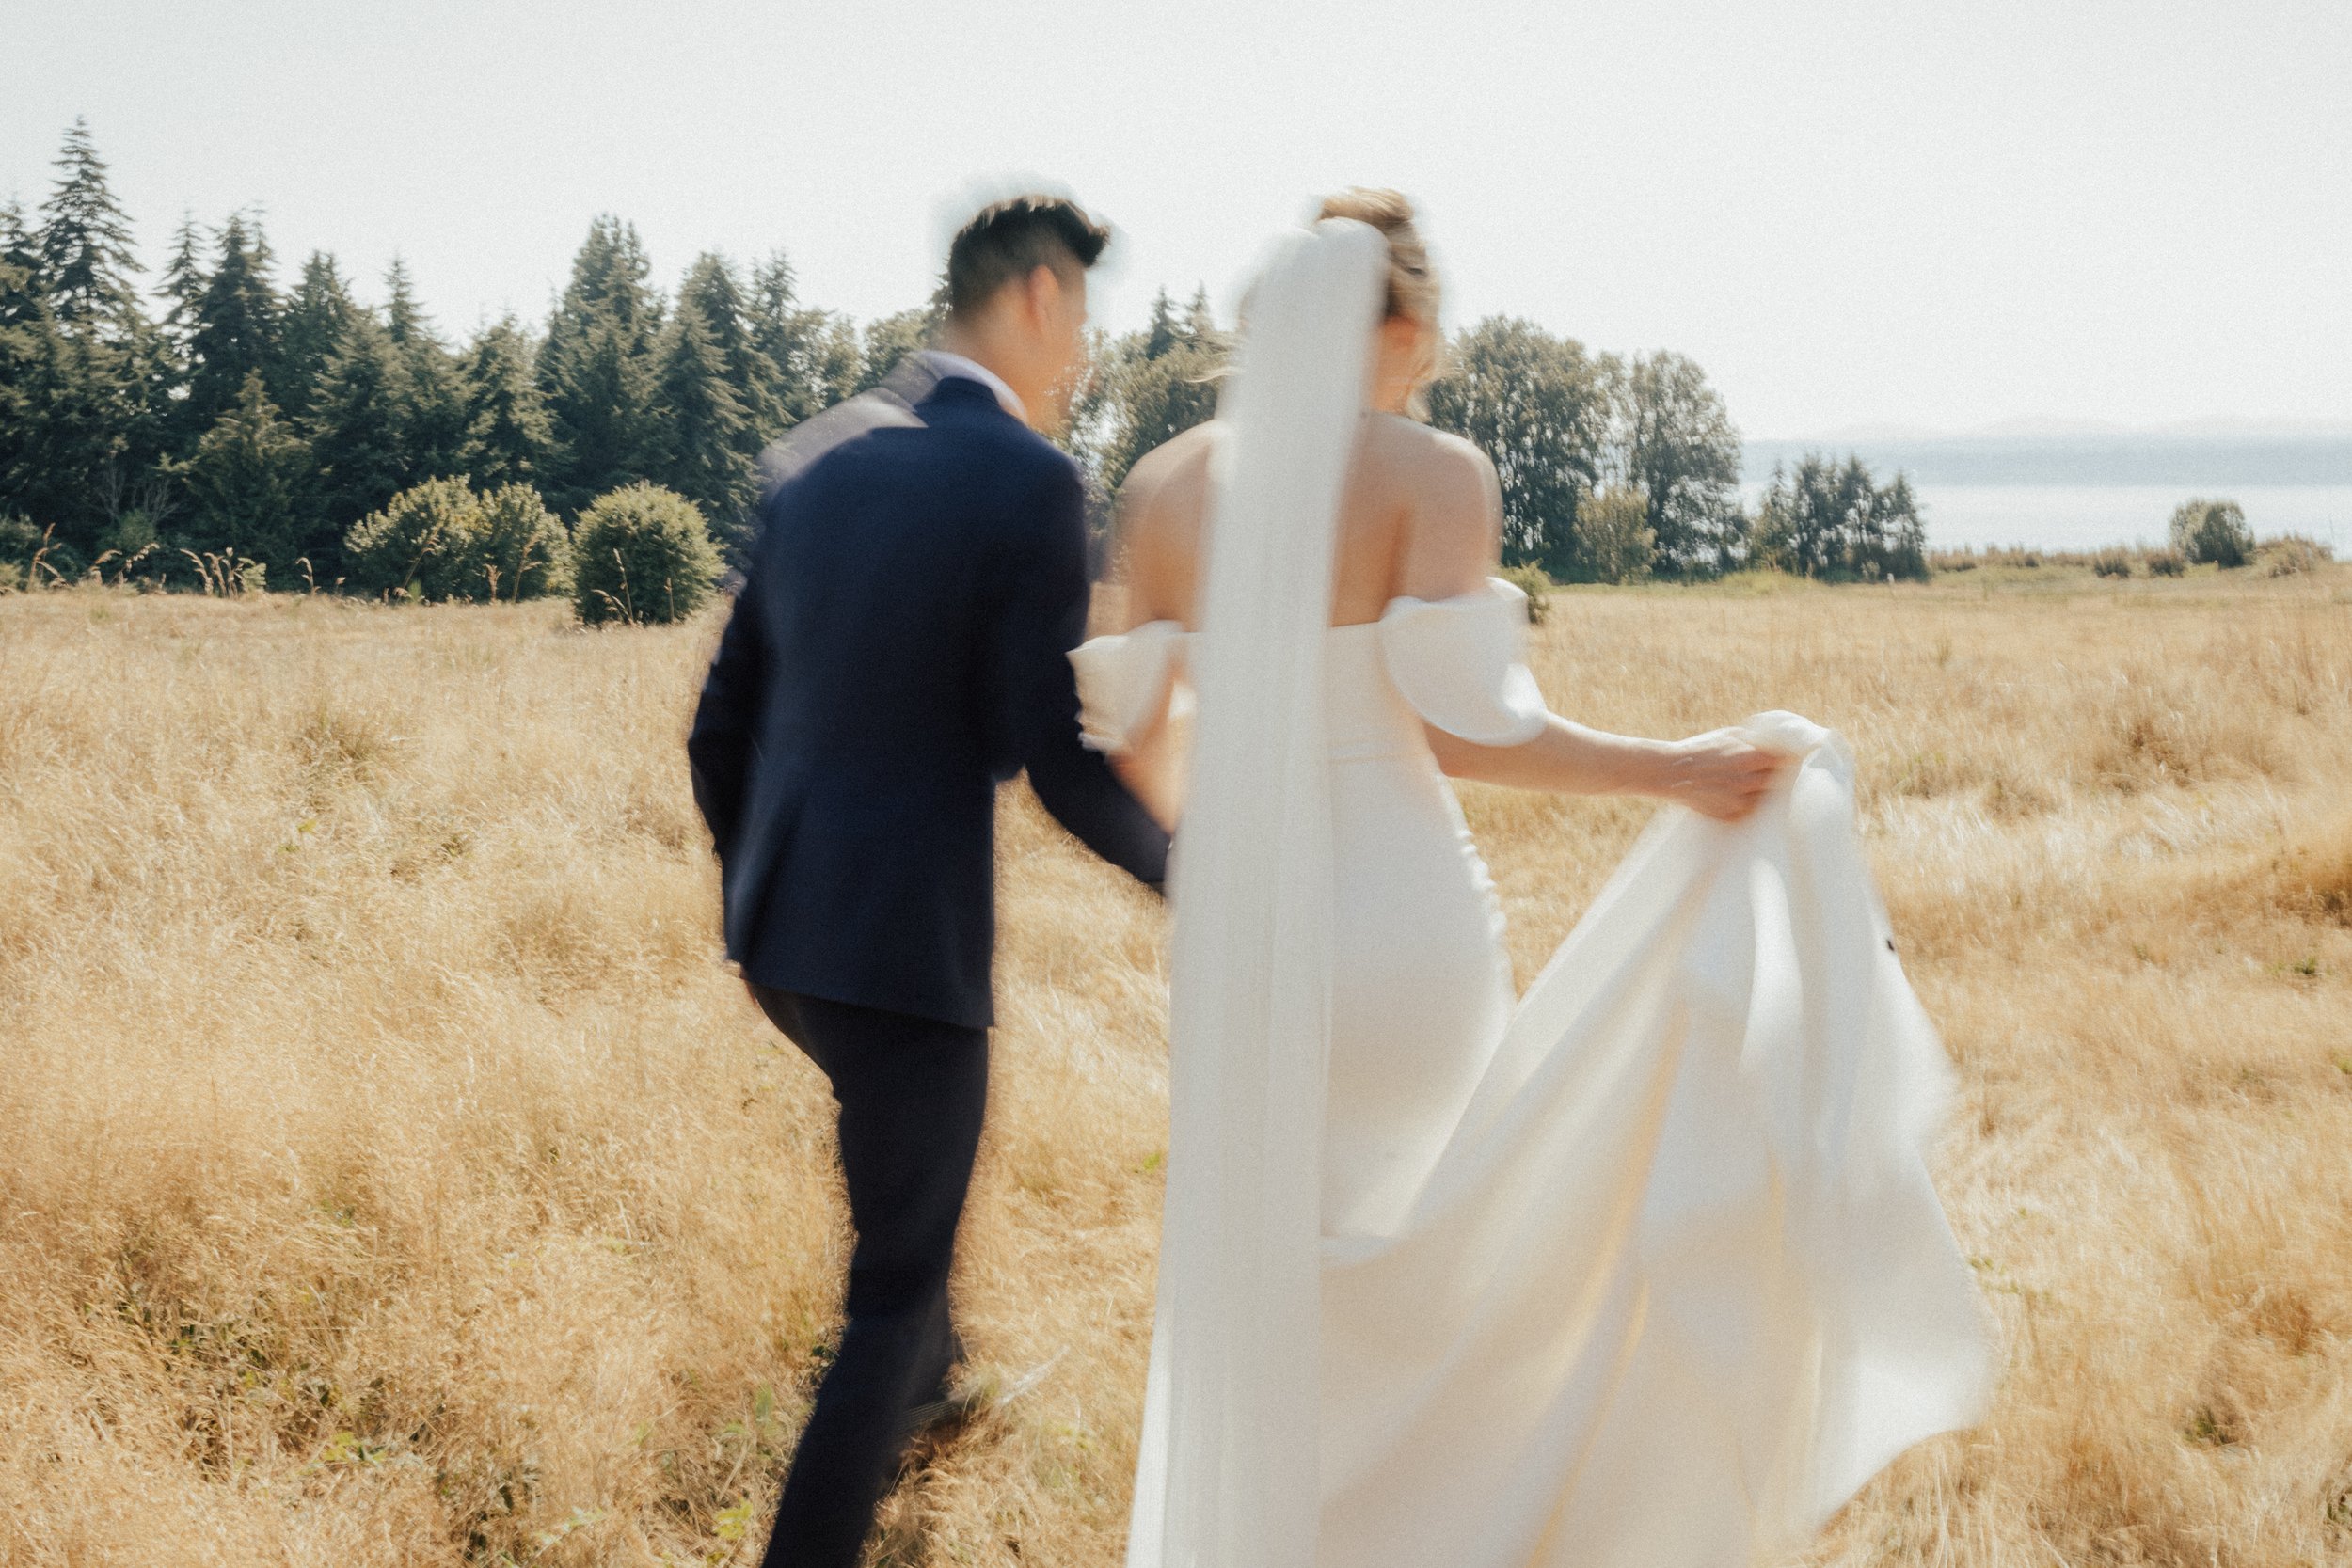 seattle-wedding-planner-pacific-engagements-discovery-park-wedding-portraits-bride-and-groom-blurred-portraits-rachel-syrisko-photography